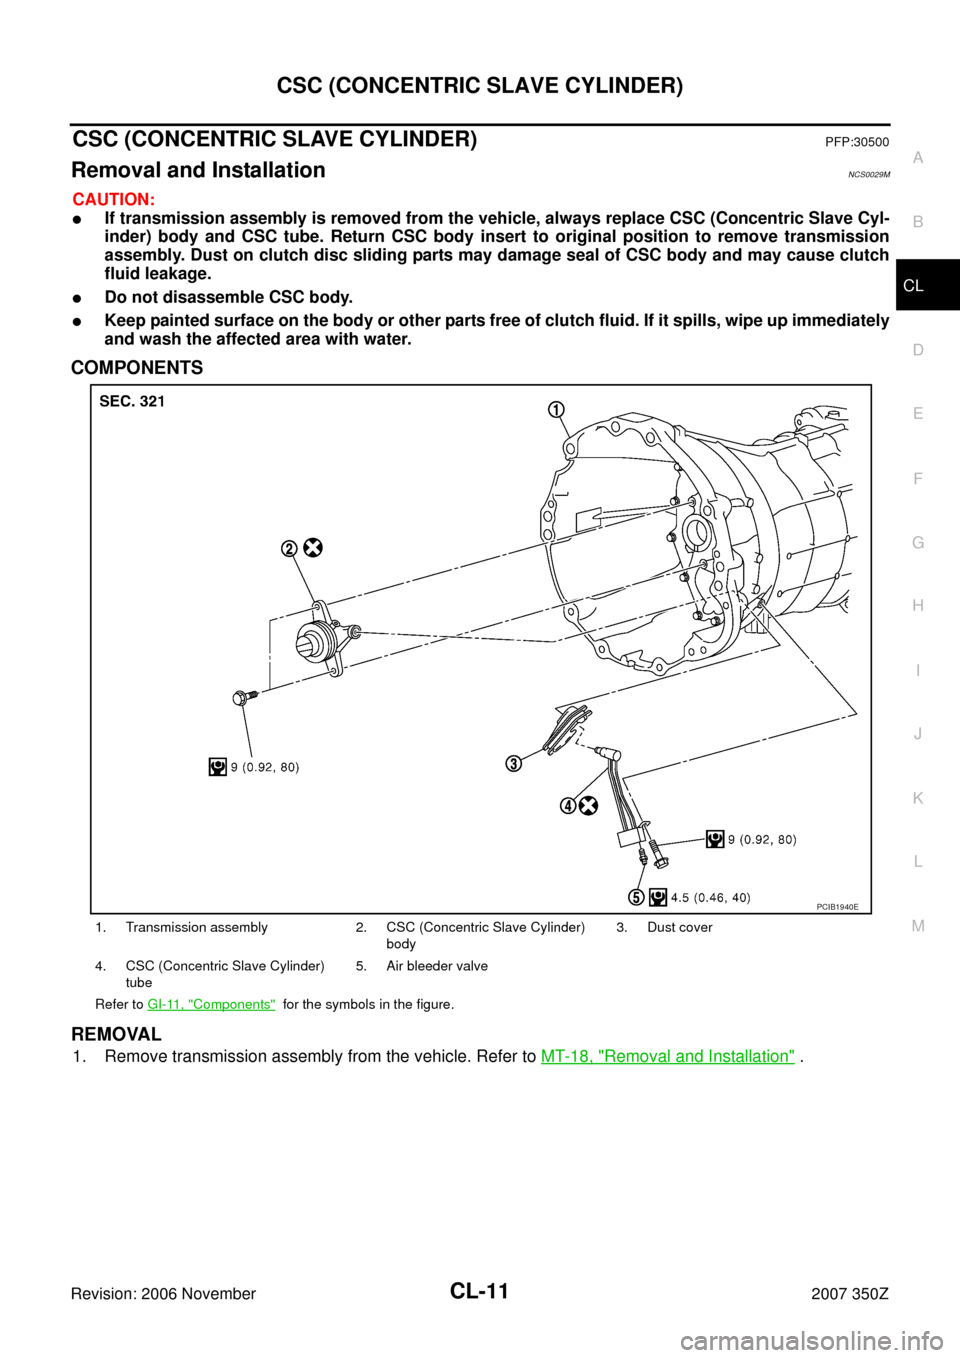 NISSAN 350Z 2007 Z33 Clutch Workshop Manual CSC (CONCENTRIC SLAVE CYLINDER)
CL-11
D
E
F
G
H
I
J
K
L
MA
B
CL
Revision: 2006 November2007 350Z
CSC (CONCENTRIC SLAVE CYLINDER)PFP:30500
Removal and InstallationNCS0029M
CAUTION:
If transmission ass